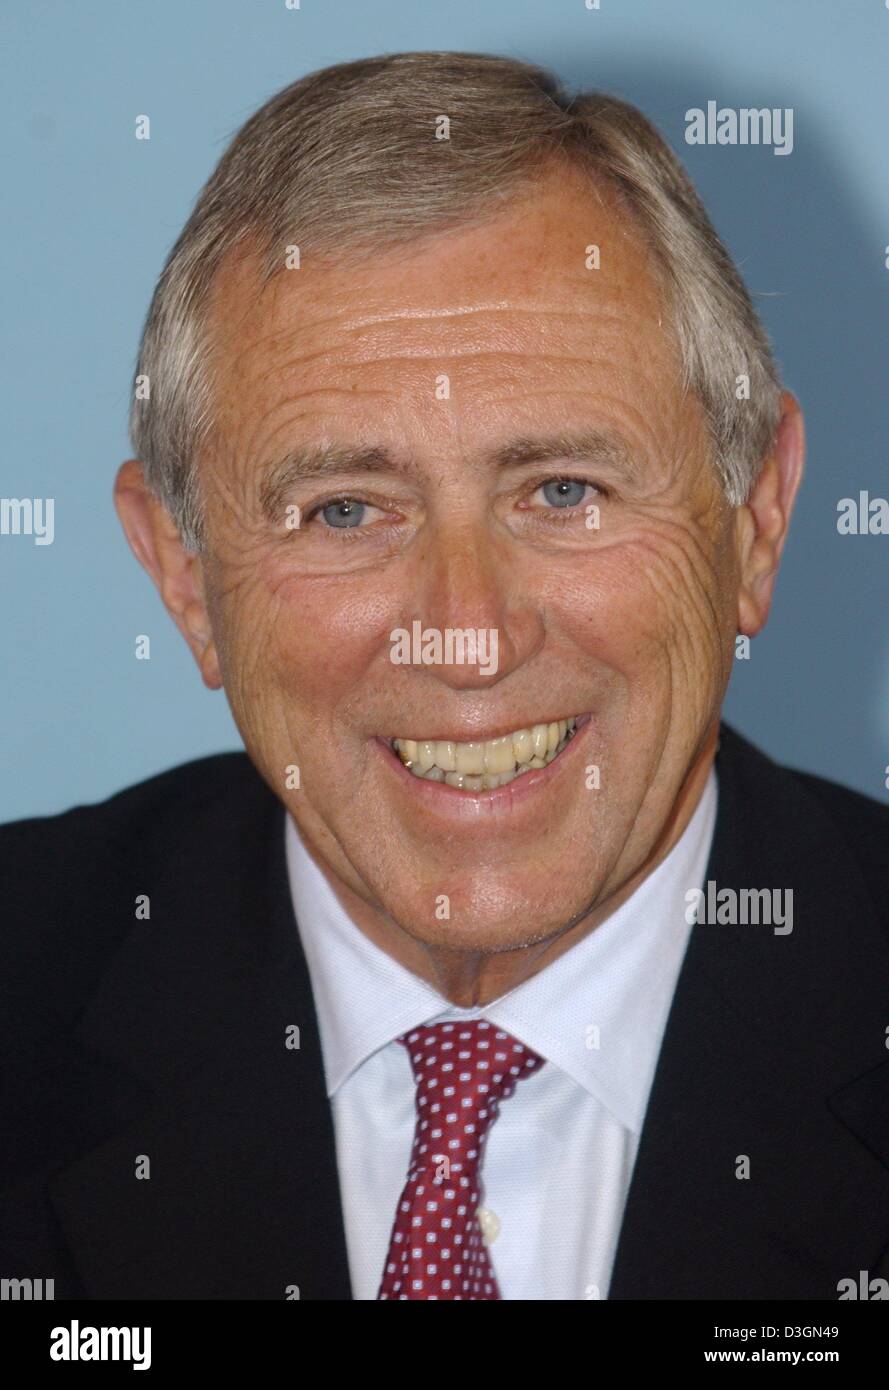 (dpa) - Danish transport minister Flemming Hansen smiles during a meeting in Berlin, Germany, 23 June 2004. Hansen and his German counterpart Manfred Stolpe discussed plans to build a bridge, tunnel or both, to form a fixed road and rail link spanning the 19-kilometre-wide Fehmarn strait between Germany and Denmark. Stock Photo